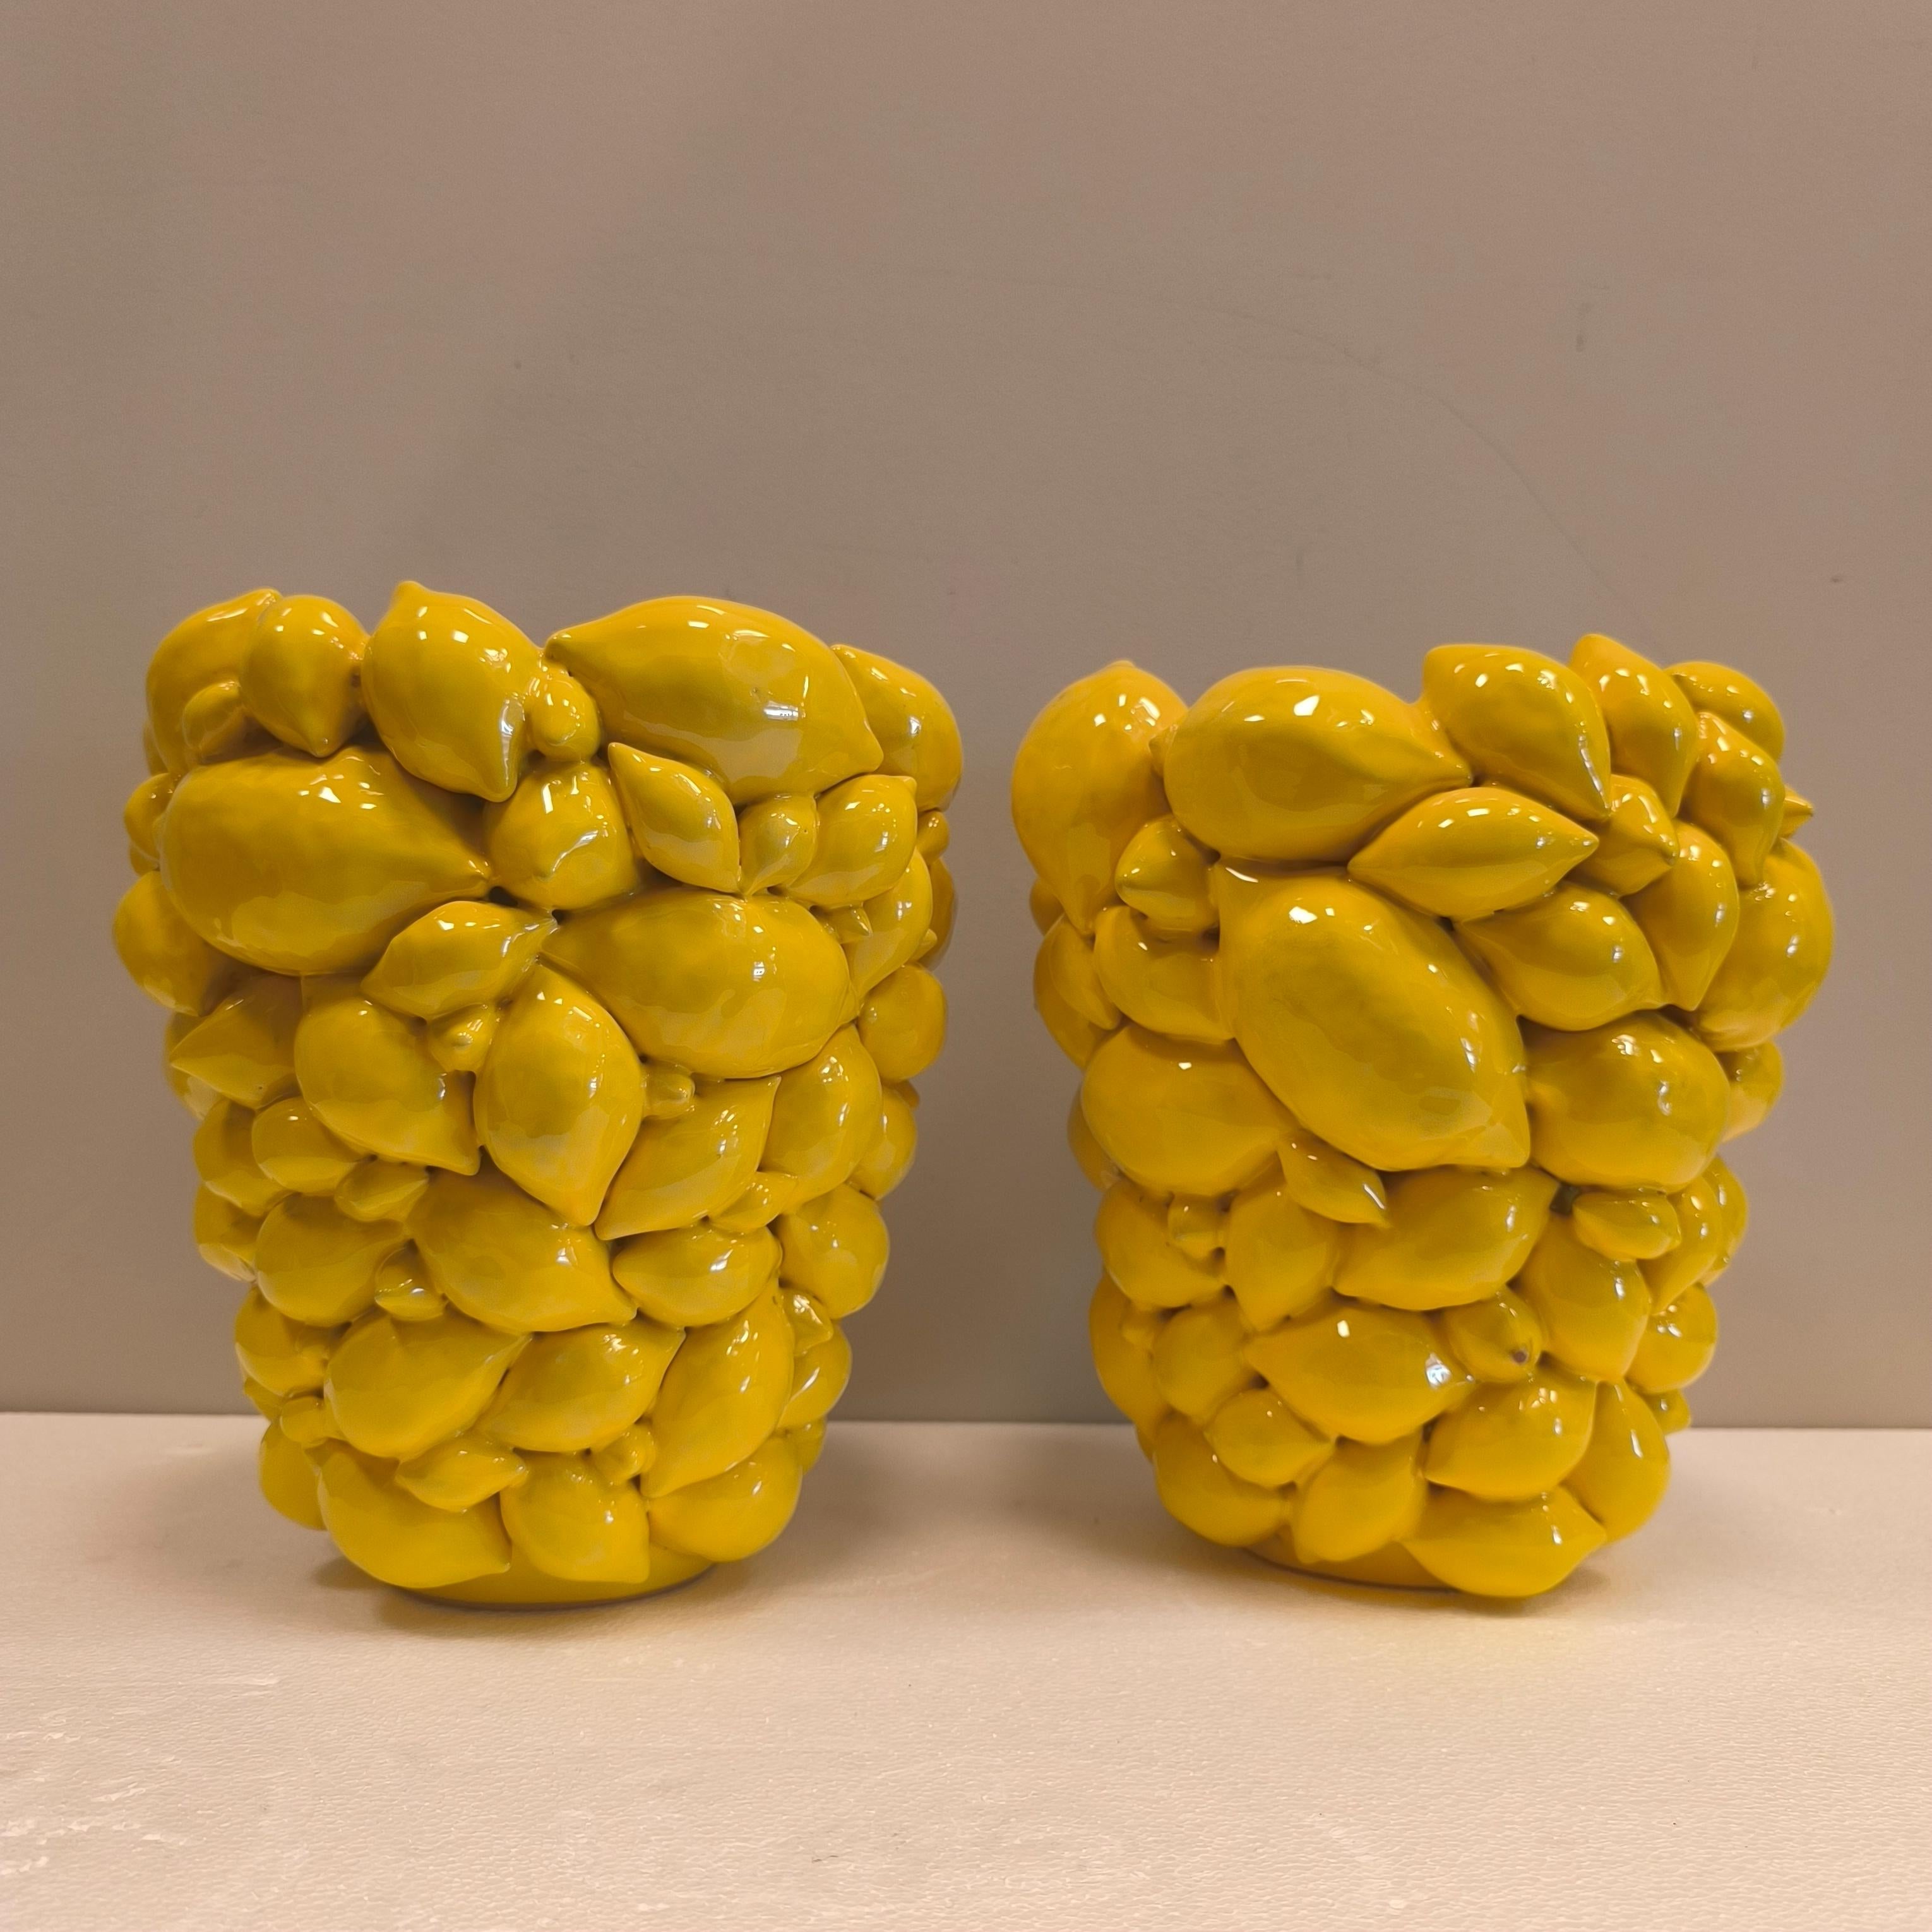 Pair of Italy  lemon vases, Yellow glazed ceramic, R. Acampora, Limited Edition For Sale 9